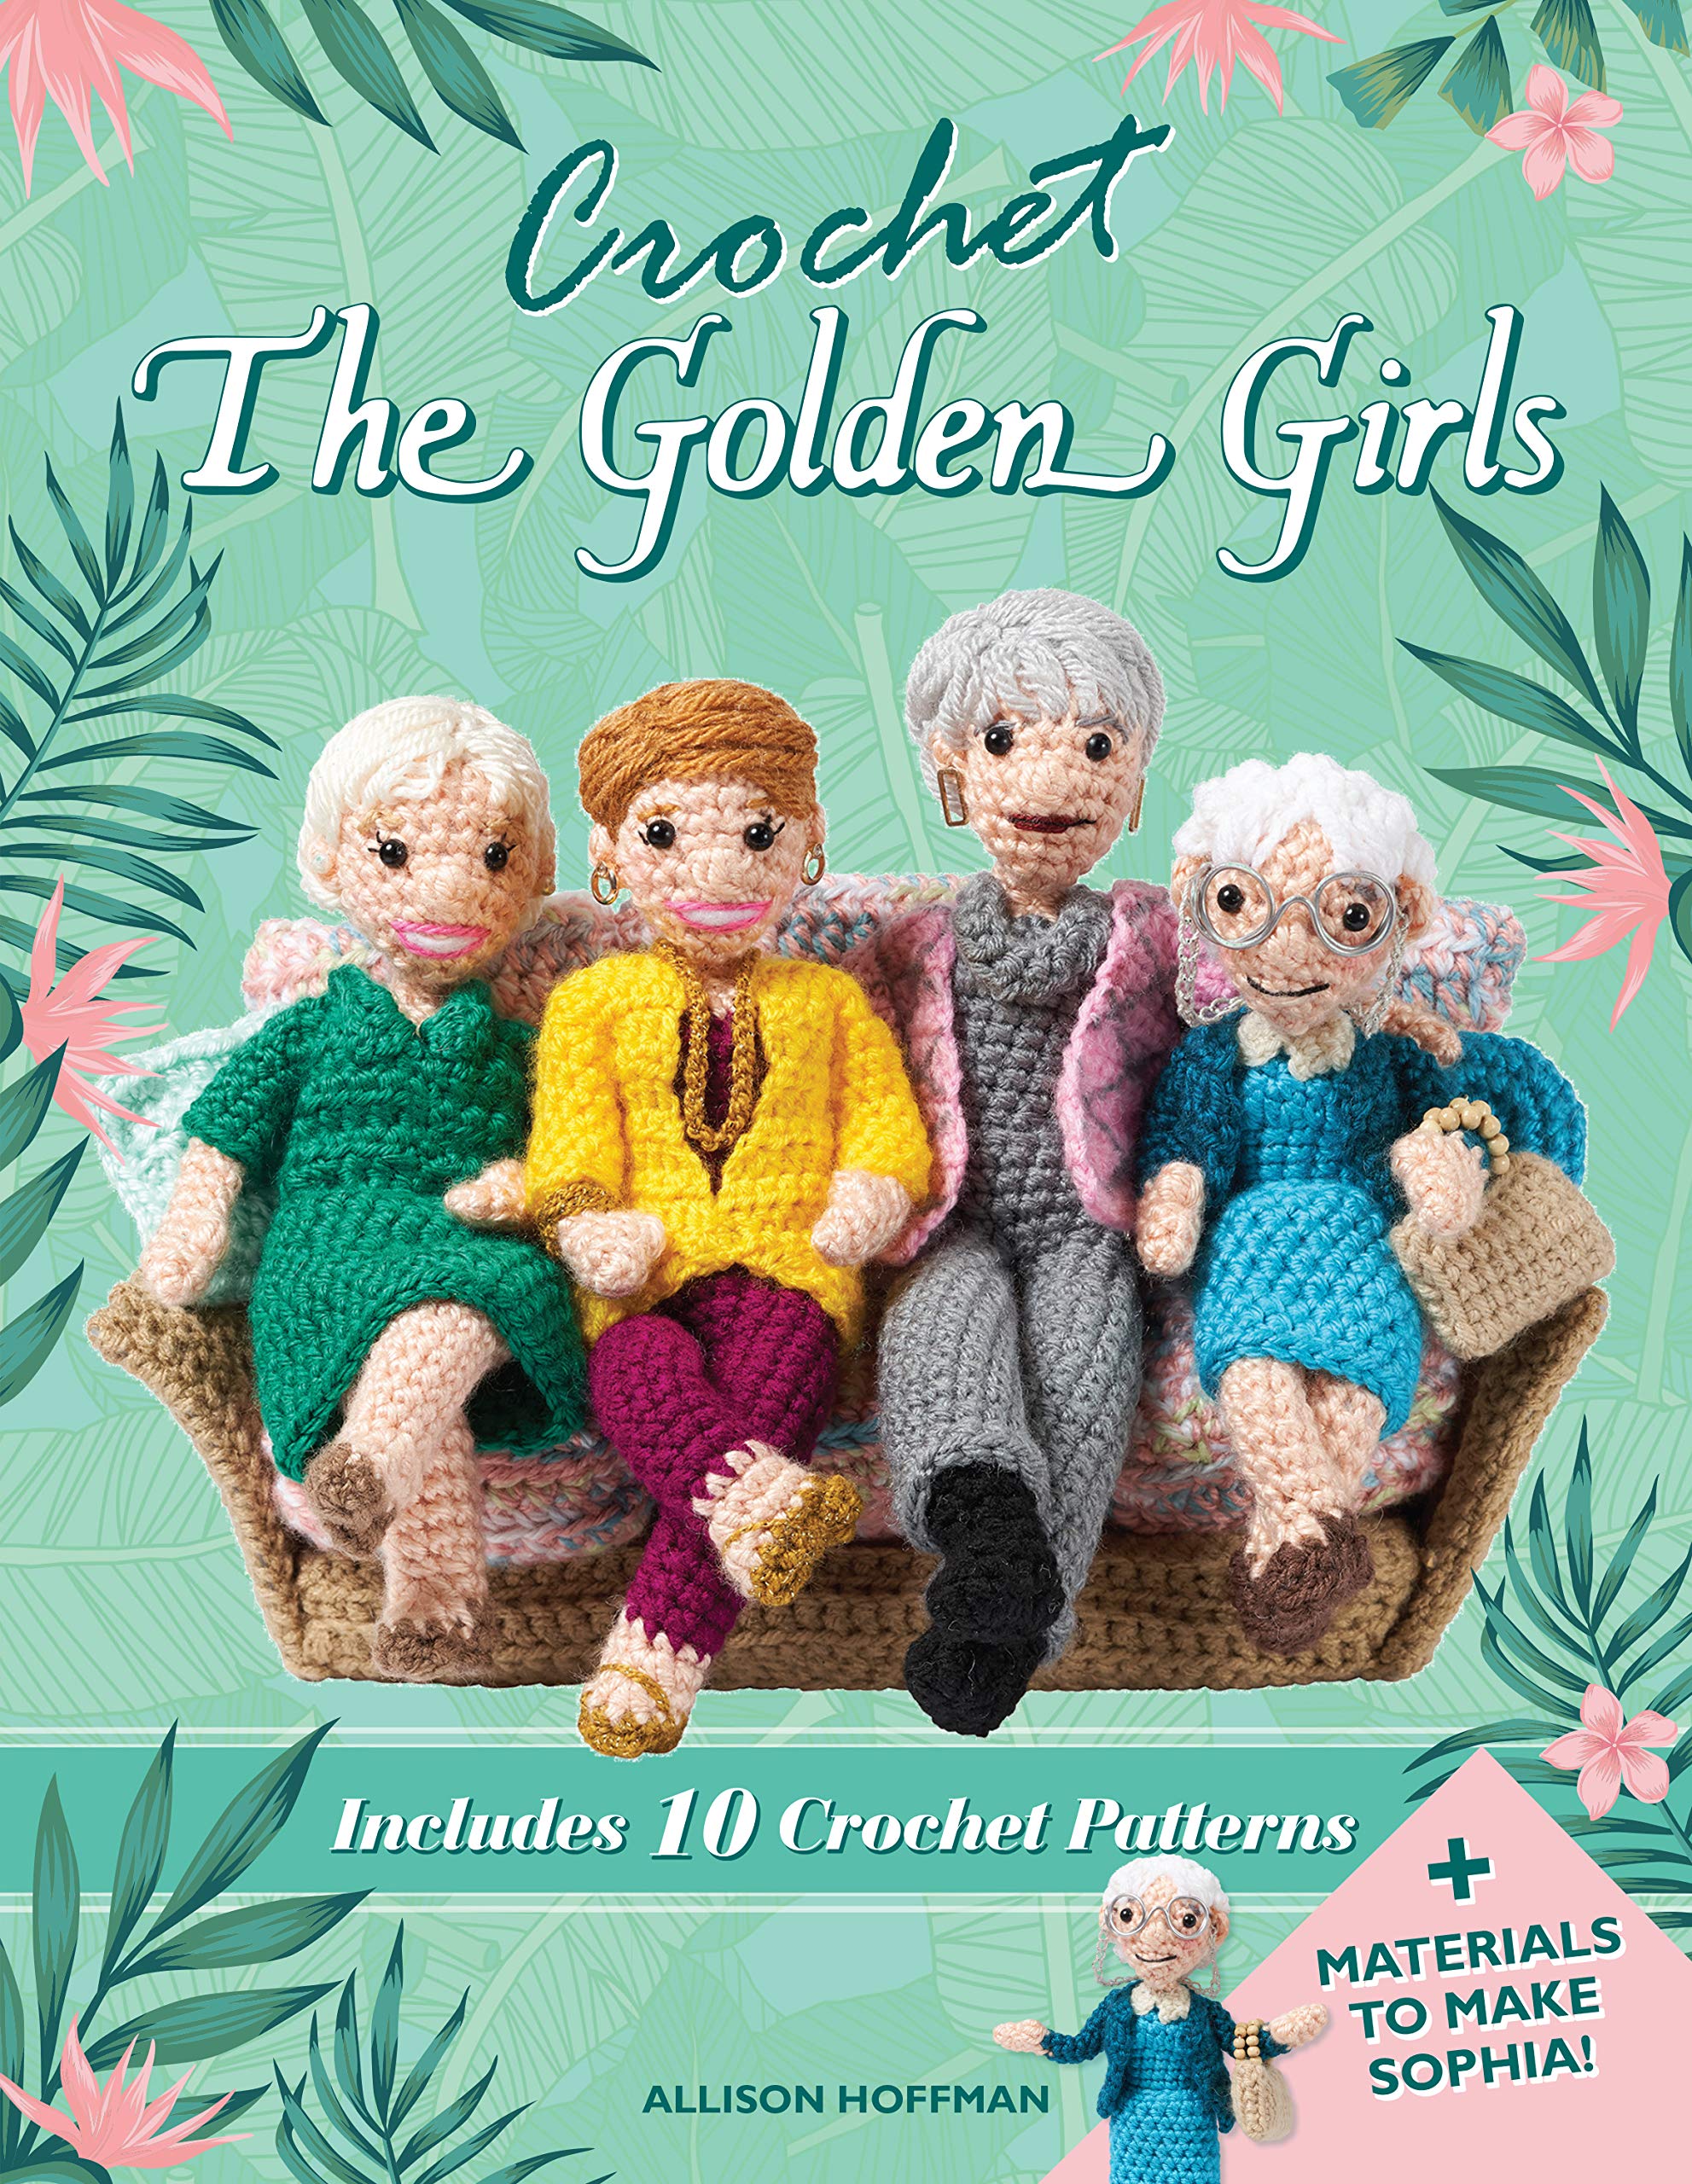 Pre-Order Your Copy of Crafty Is Cool's 'Golden Girls' Crochet Kit!